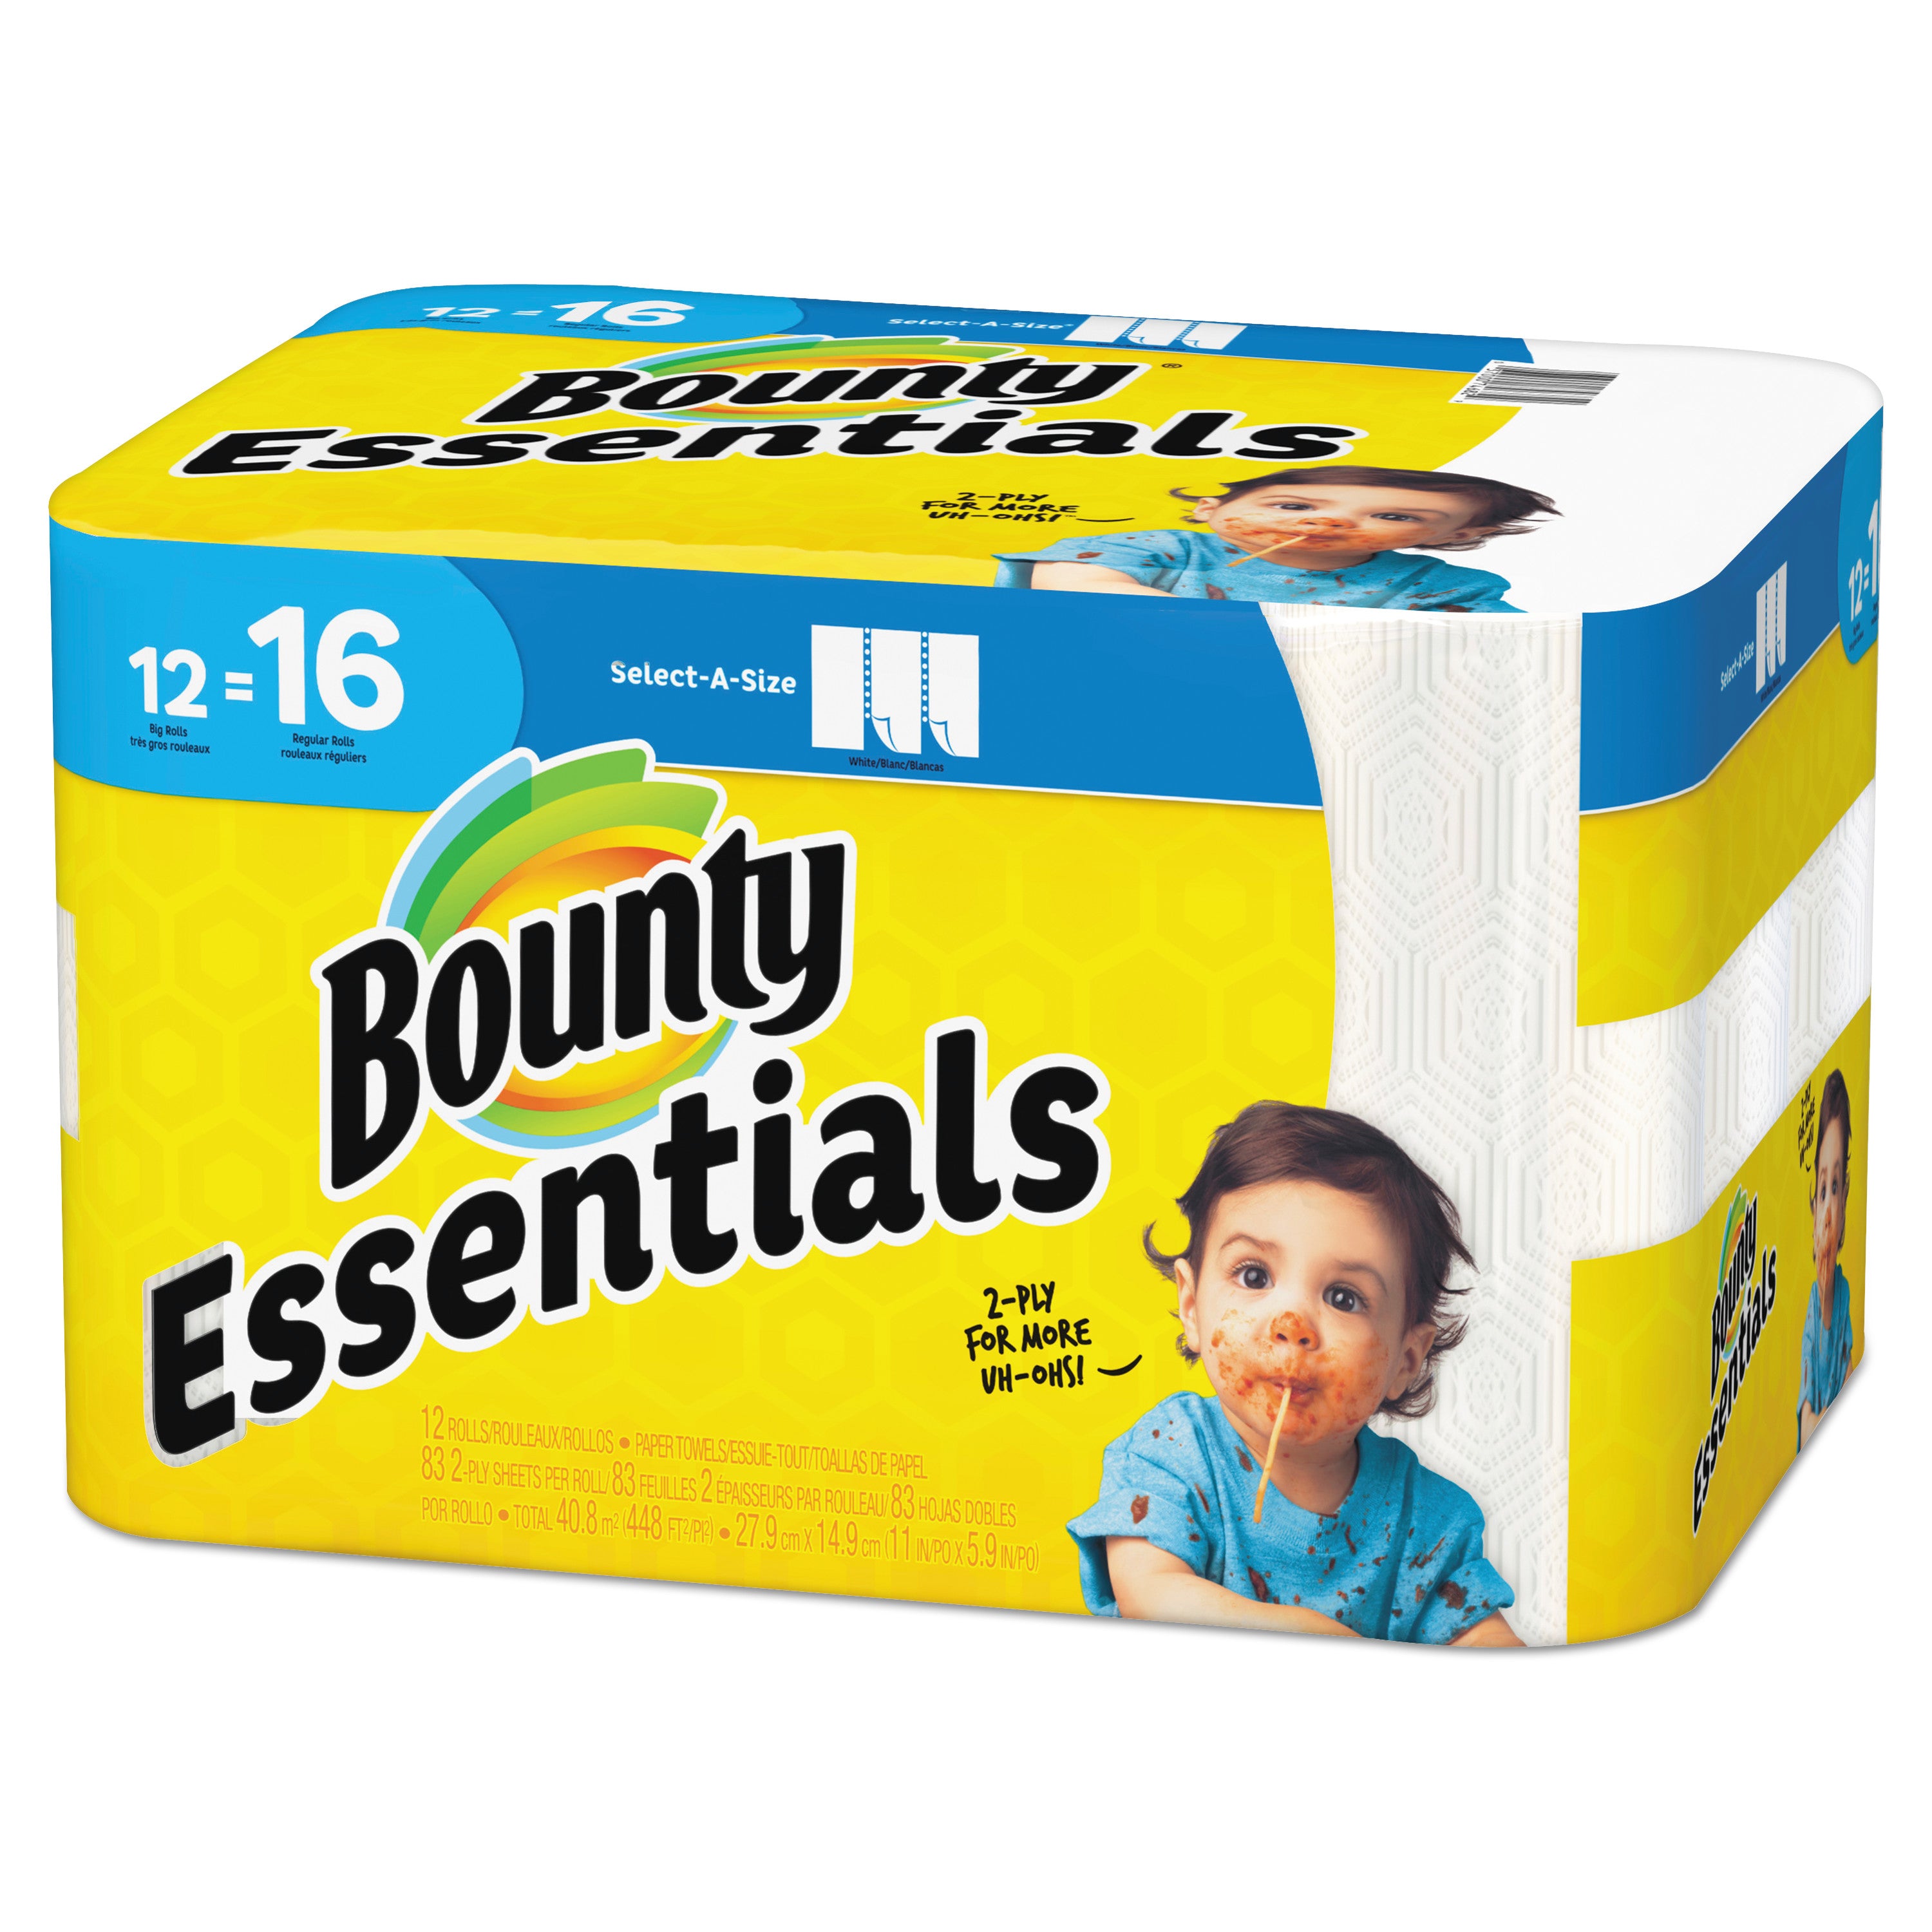 essentials-select-a-size-kitchen-roll-paper-towels-2-ply-83-sheets-roll-12-rolls-carton_pgc74682 - 1